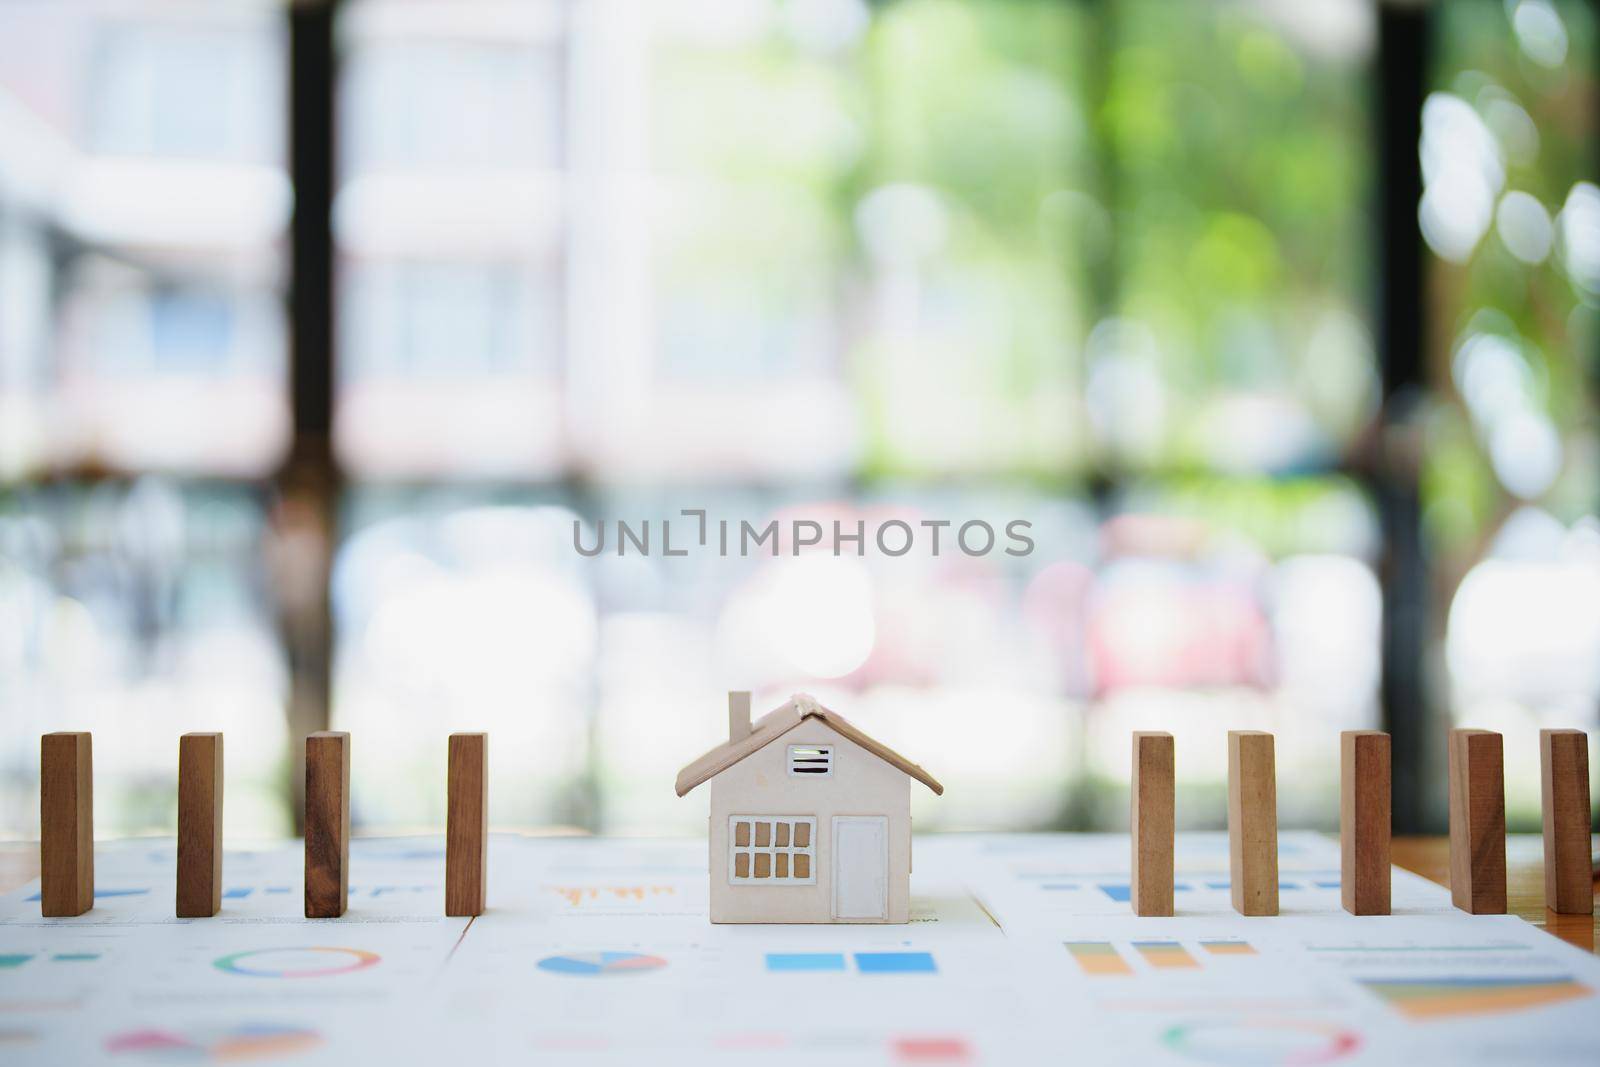 Model house and wooden stick, insurance concept by Manastrong